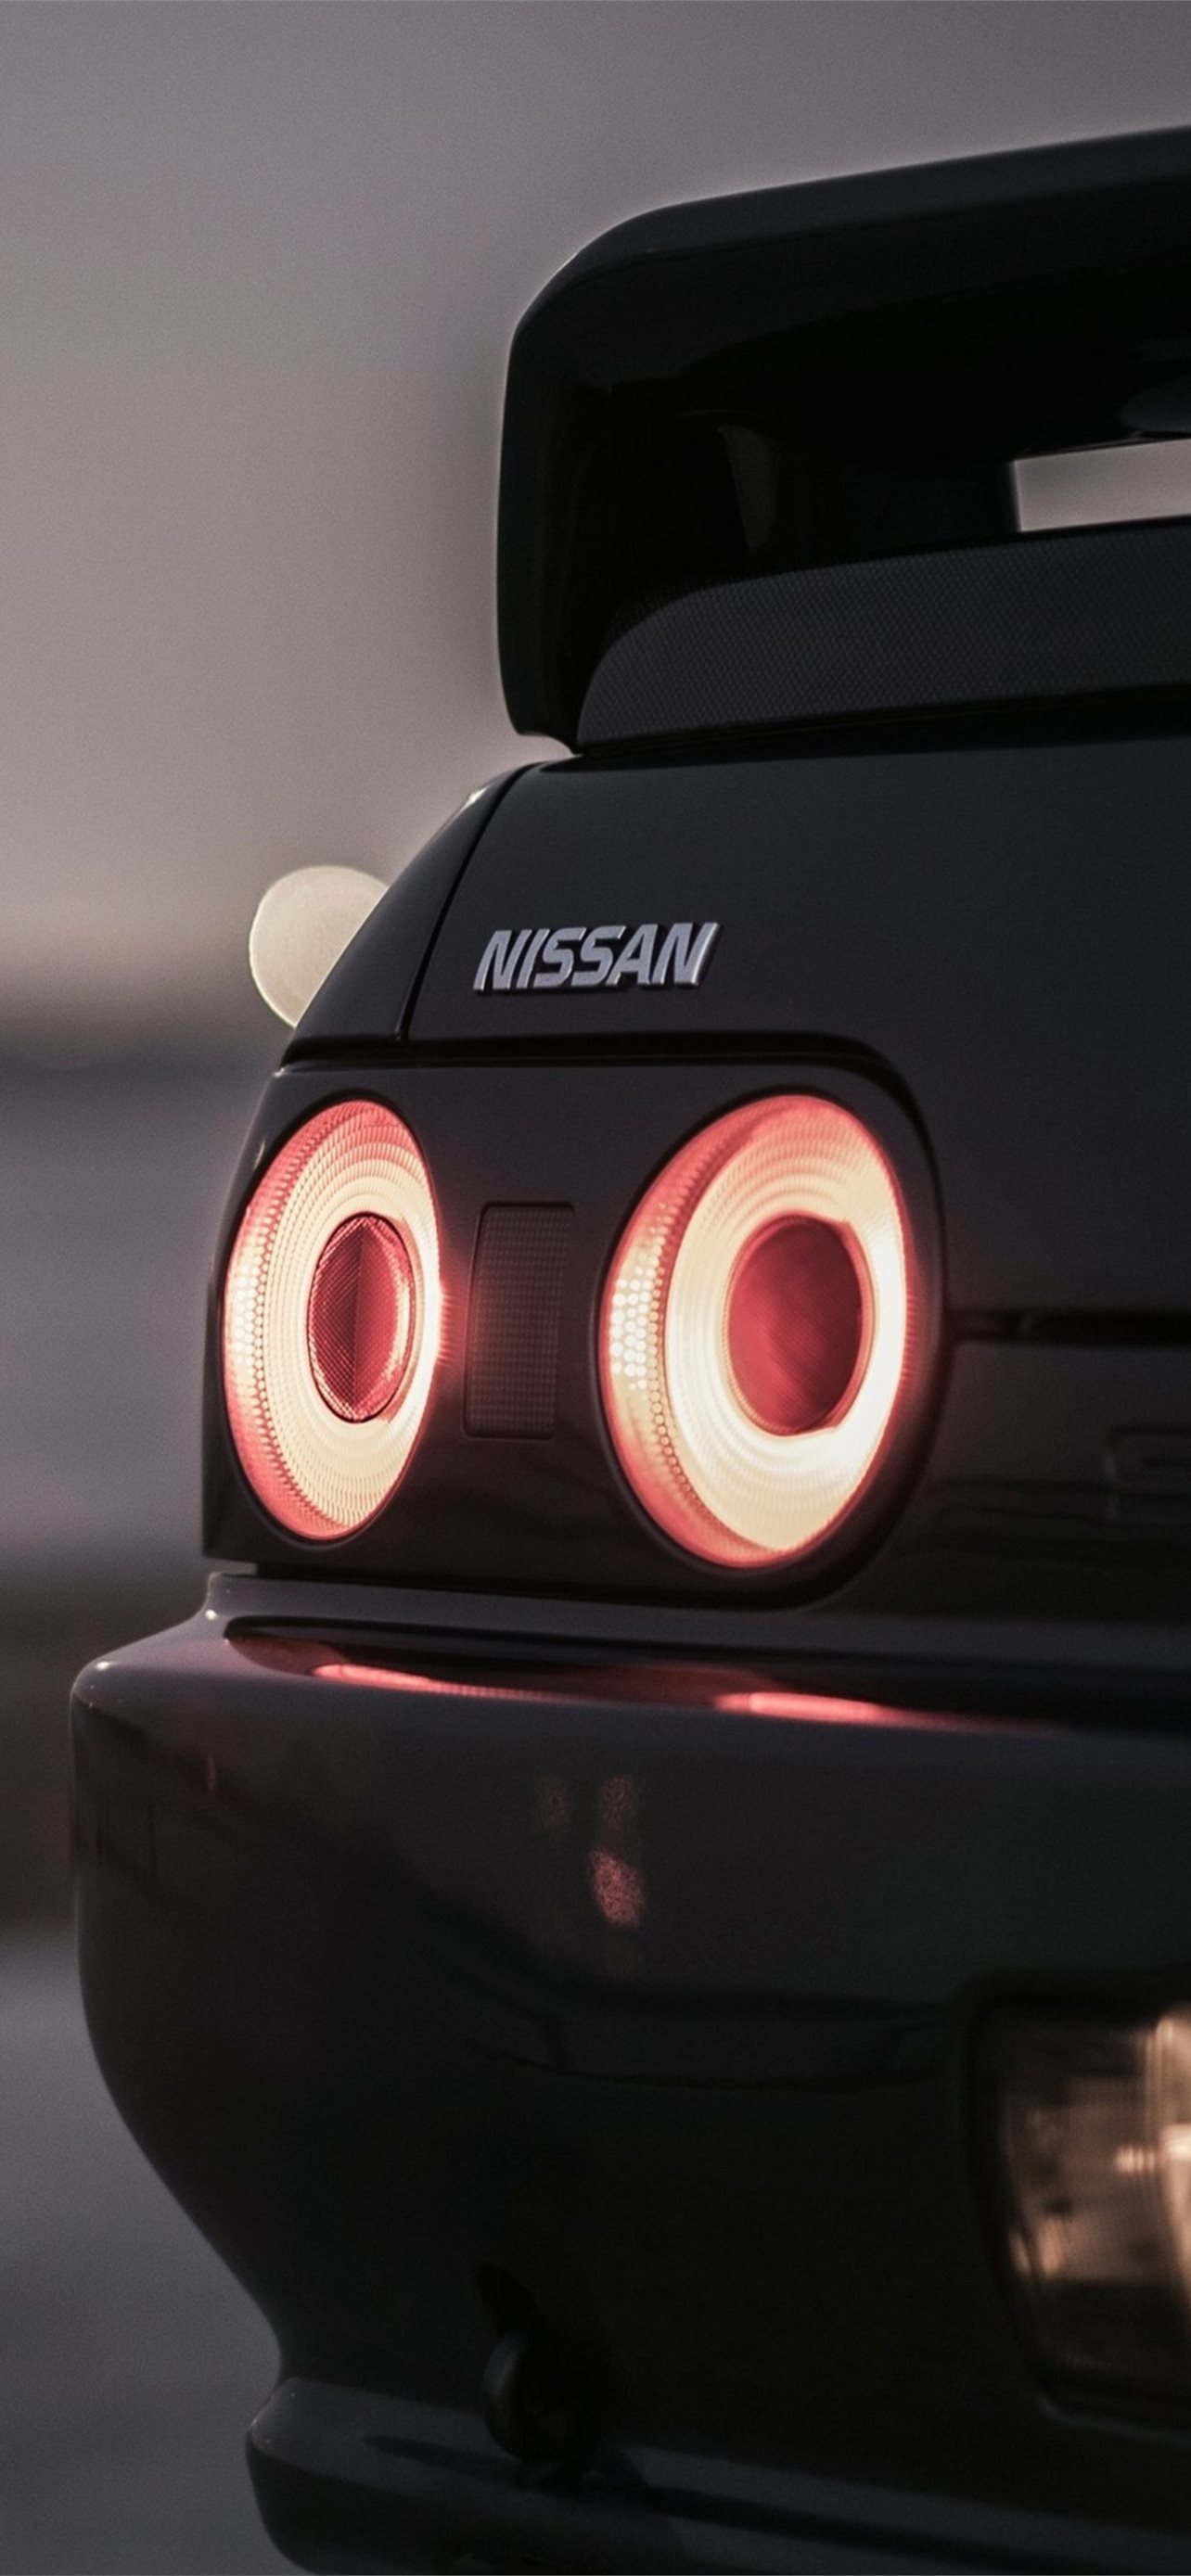 nissan r32 iPhone Wallpaper Free Download